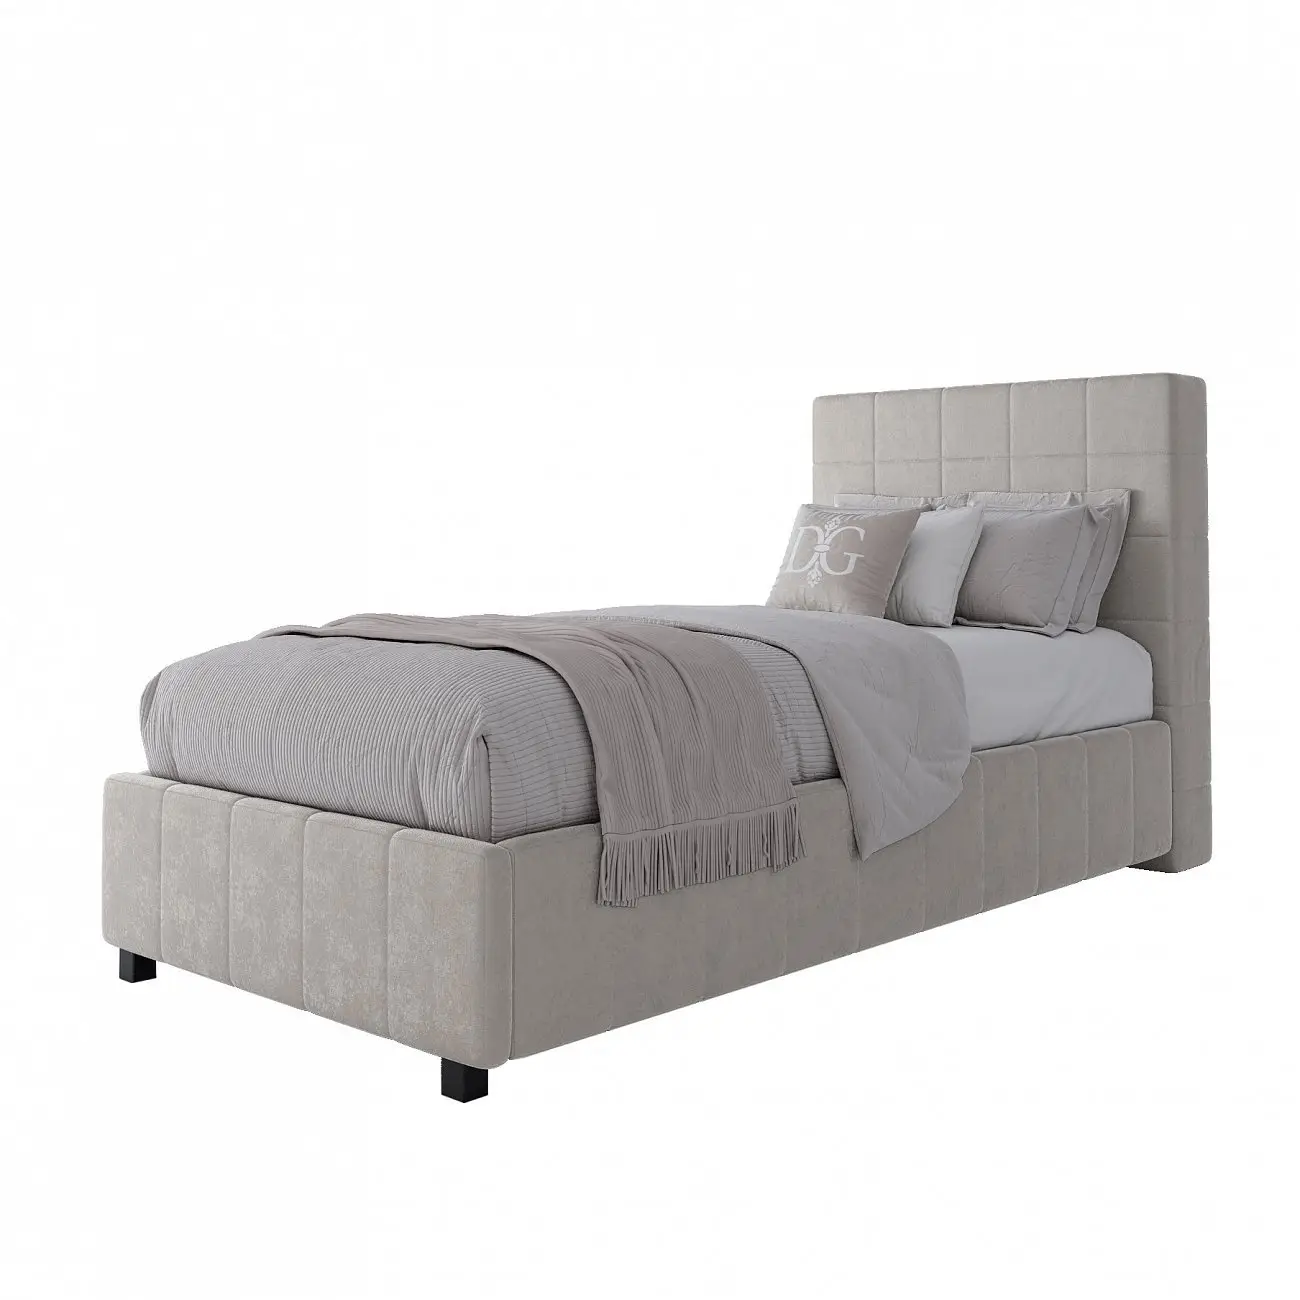 Single bed with upholstered headboard 90x200 cm milk Shining Modern